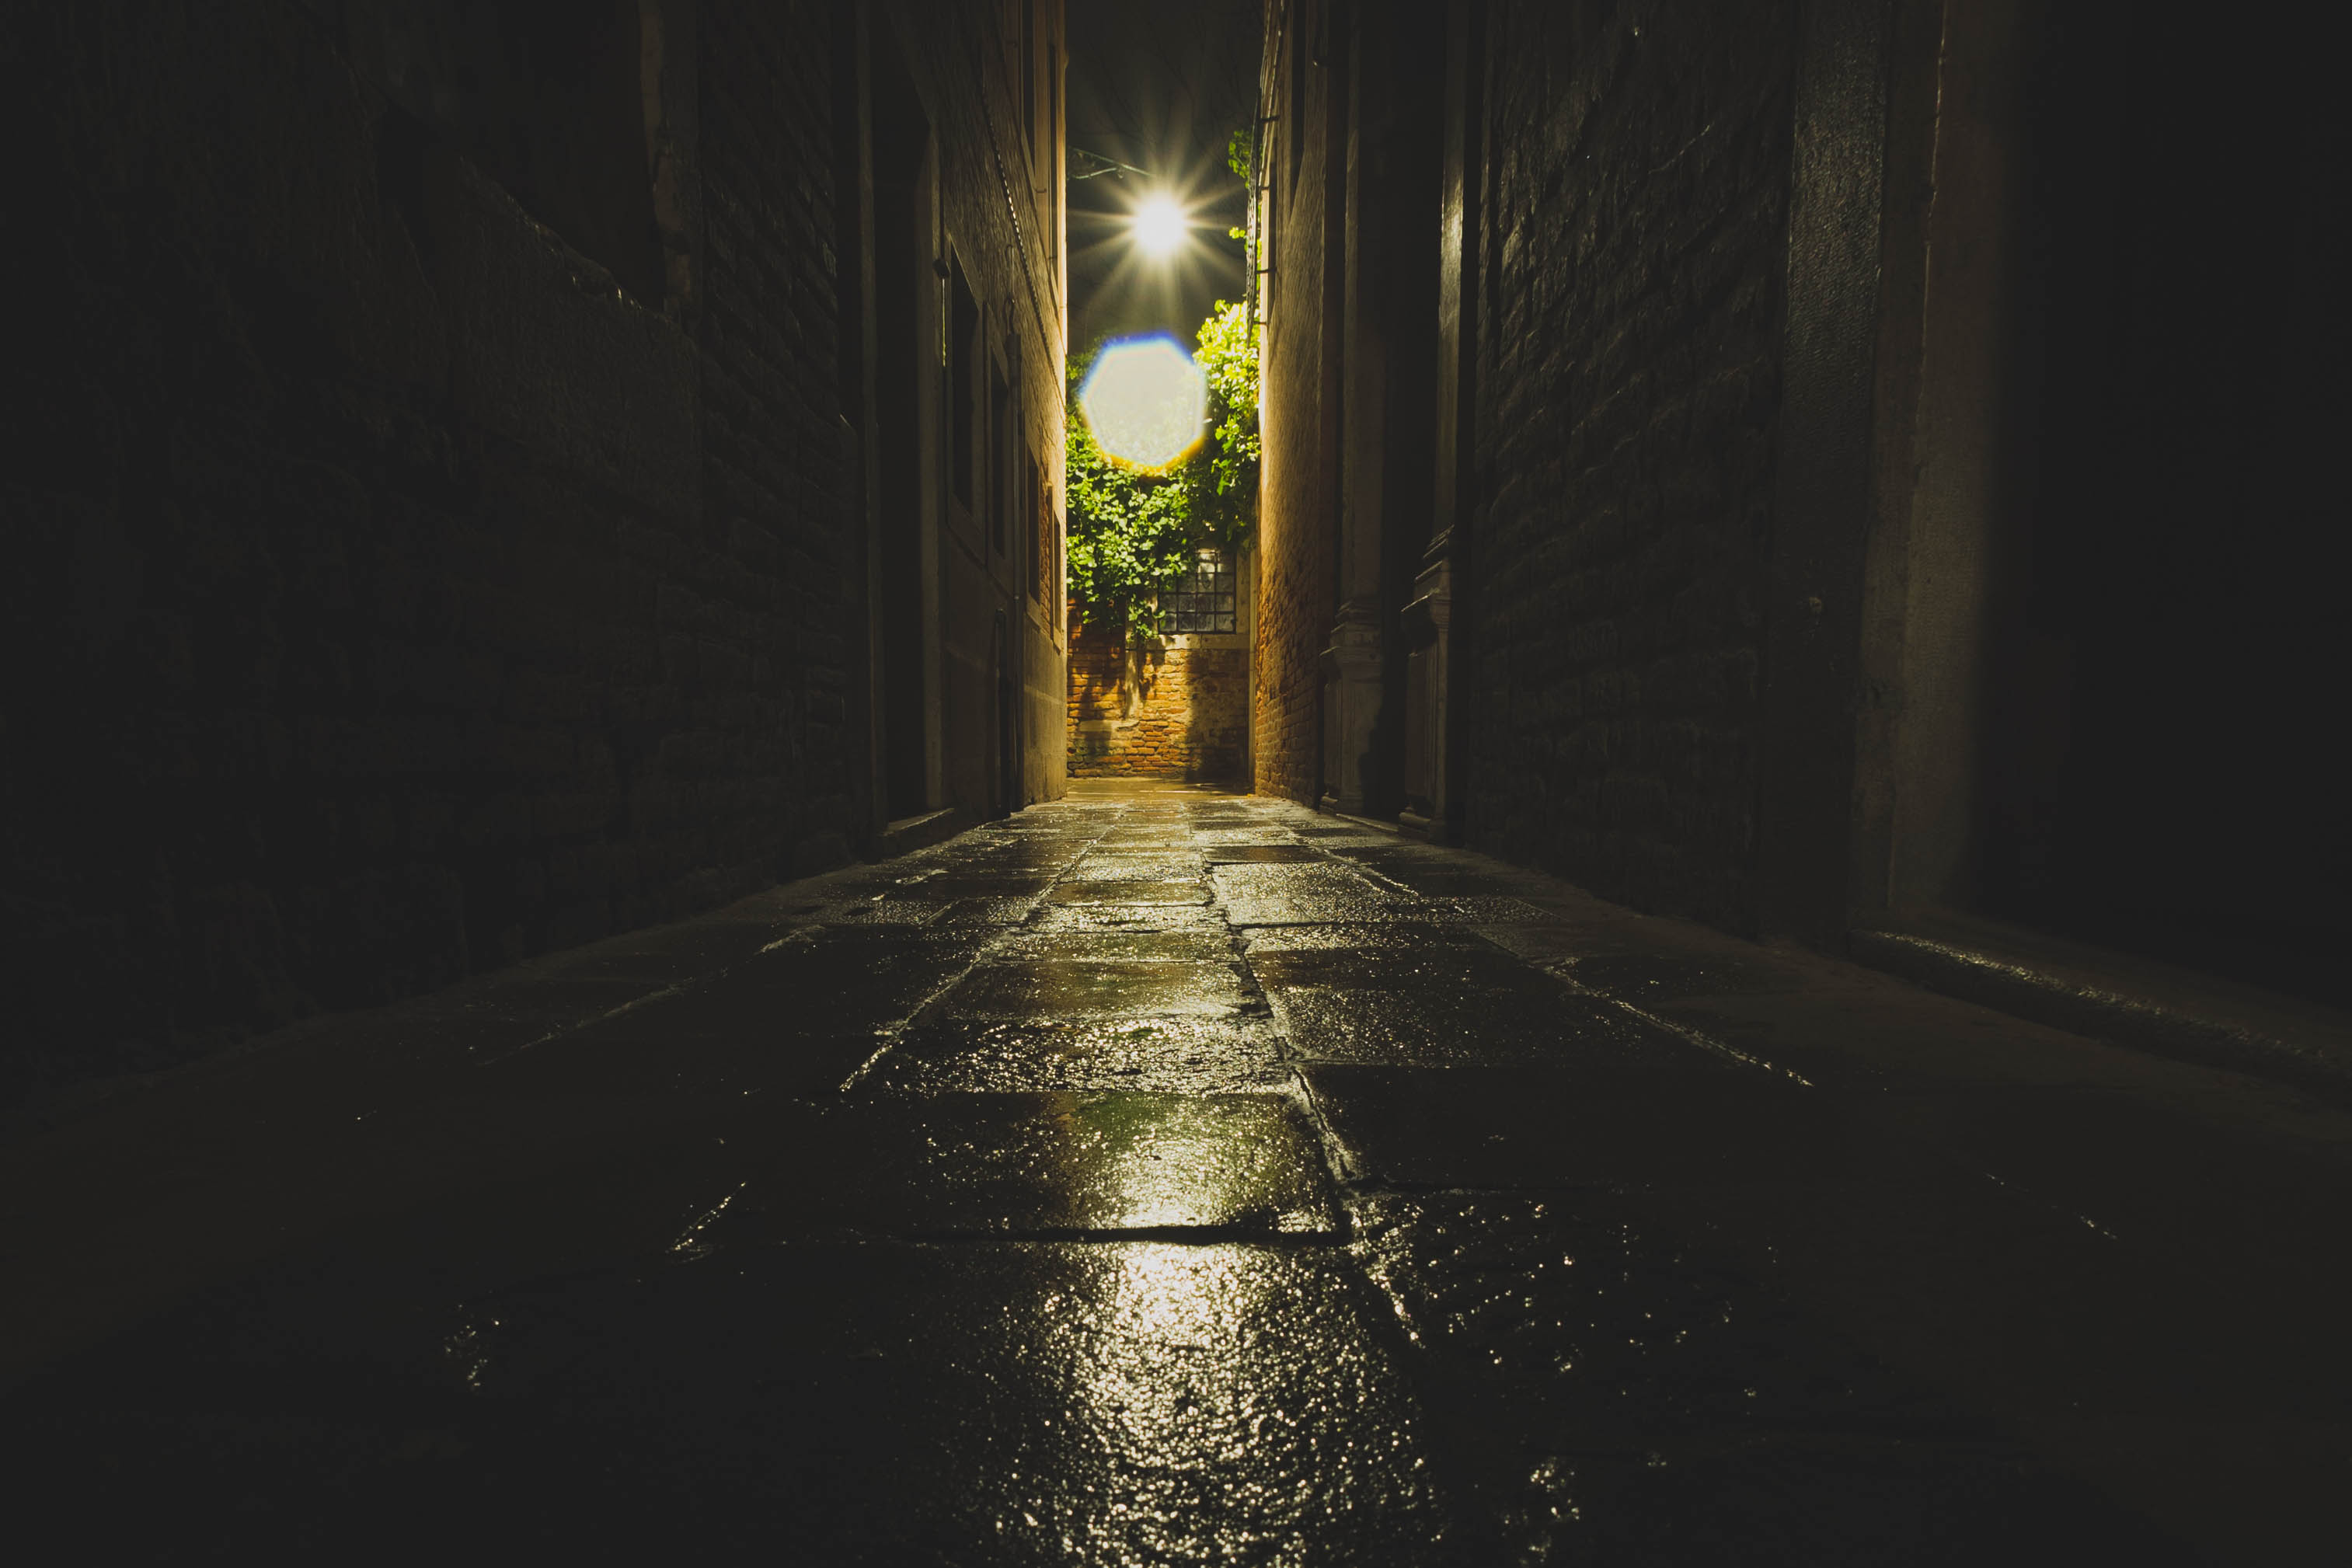 156480 download wallpaper cities, rain, night, italy, venice, wet, tile, humid, lane screensavers and pictures for free